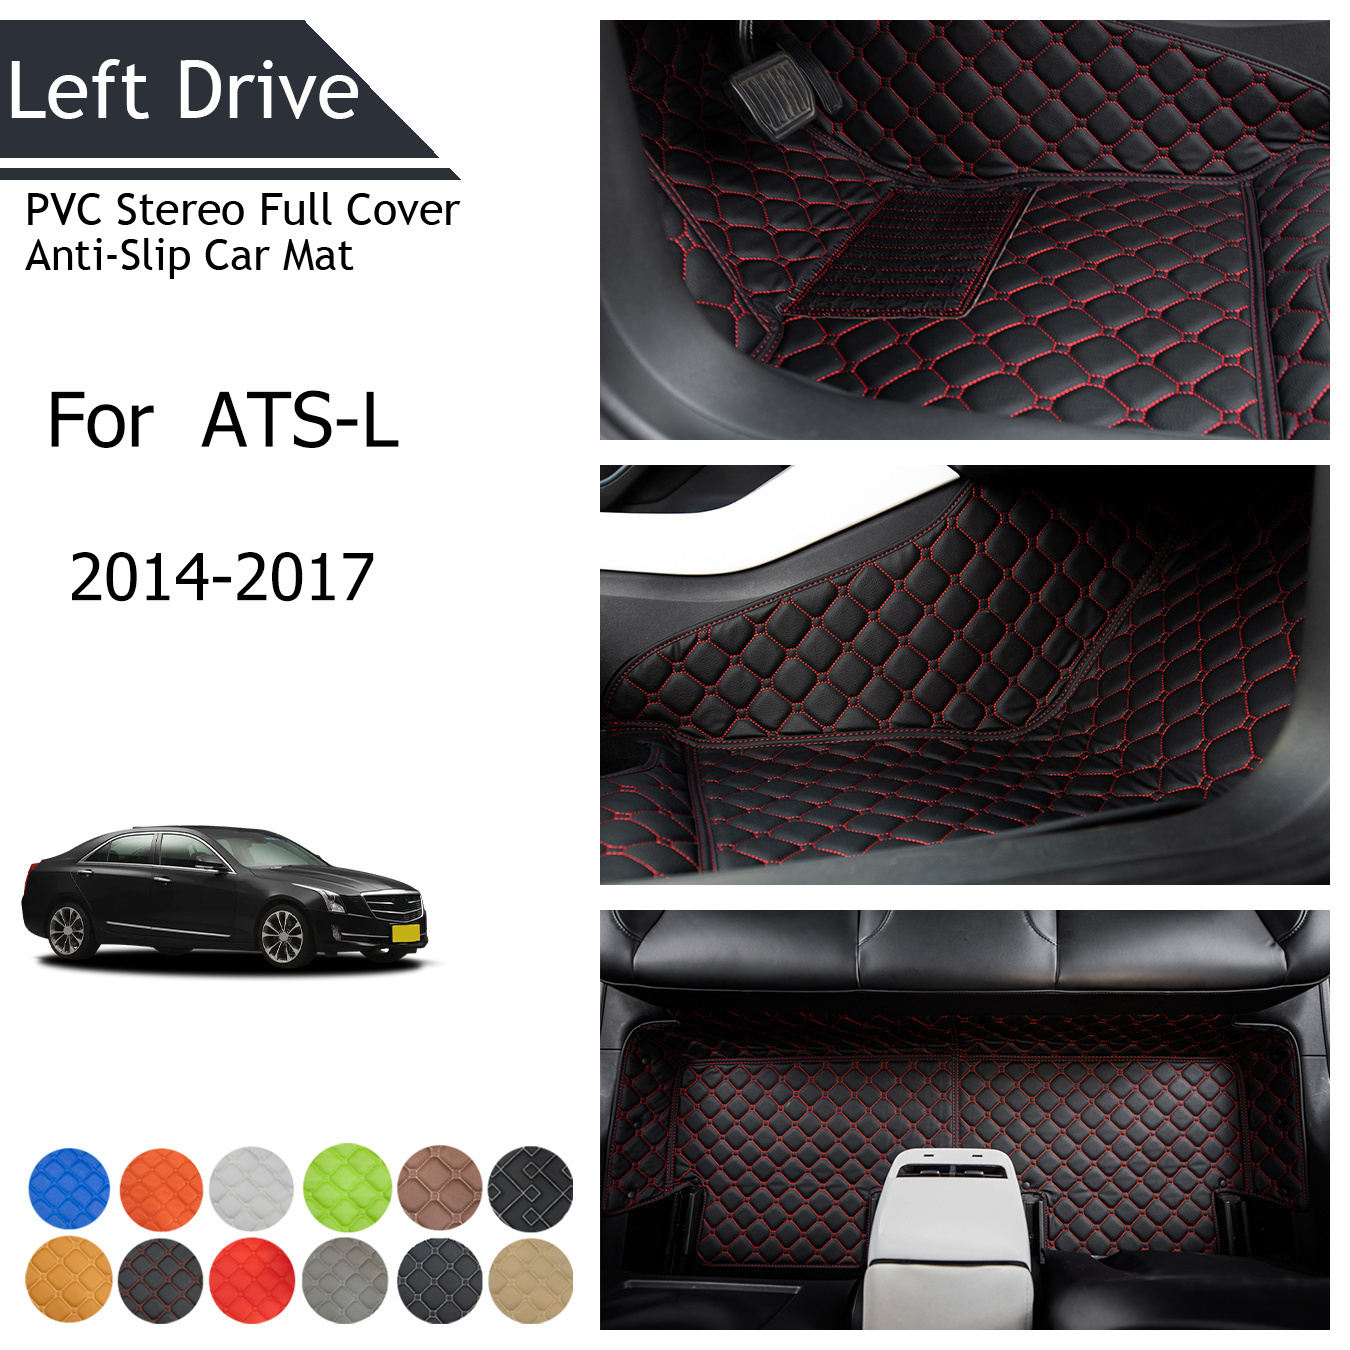 

Tegart [lhd]for Cadillac For Ats-l 2014-2017 3 Layers Pvc Stereo Full Cover Anti-slip Car Mats